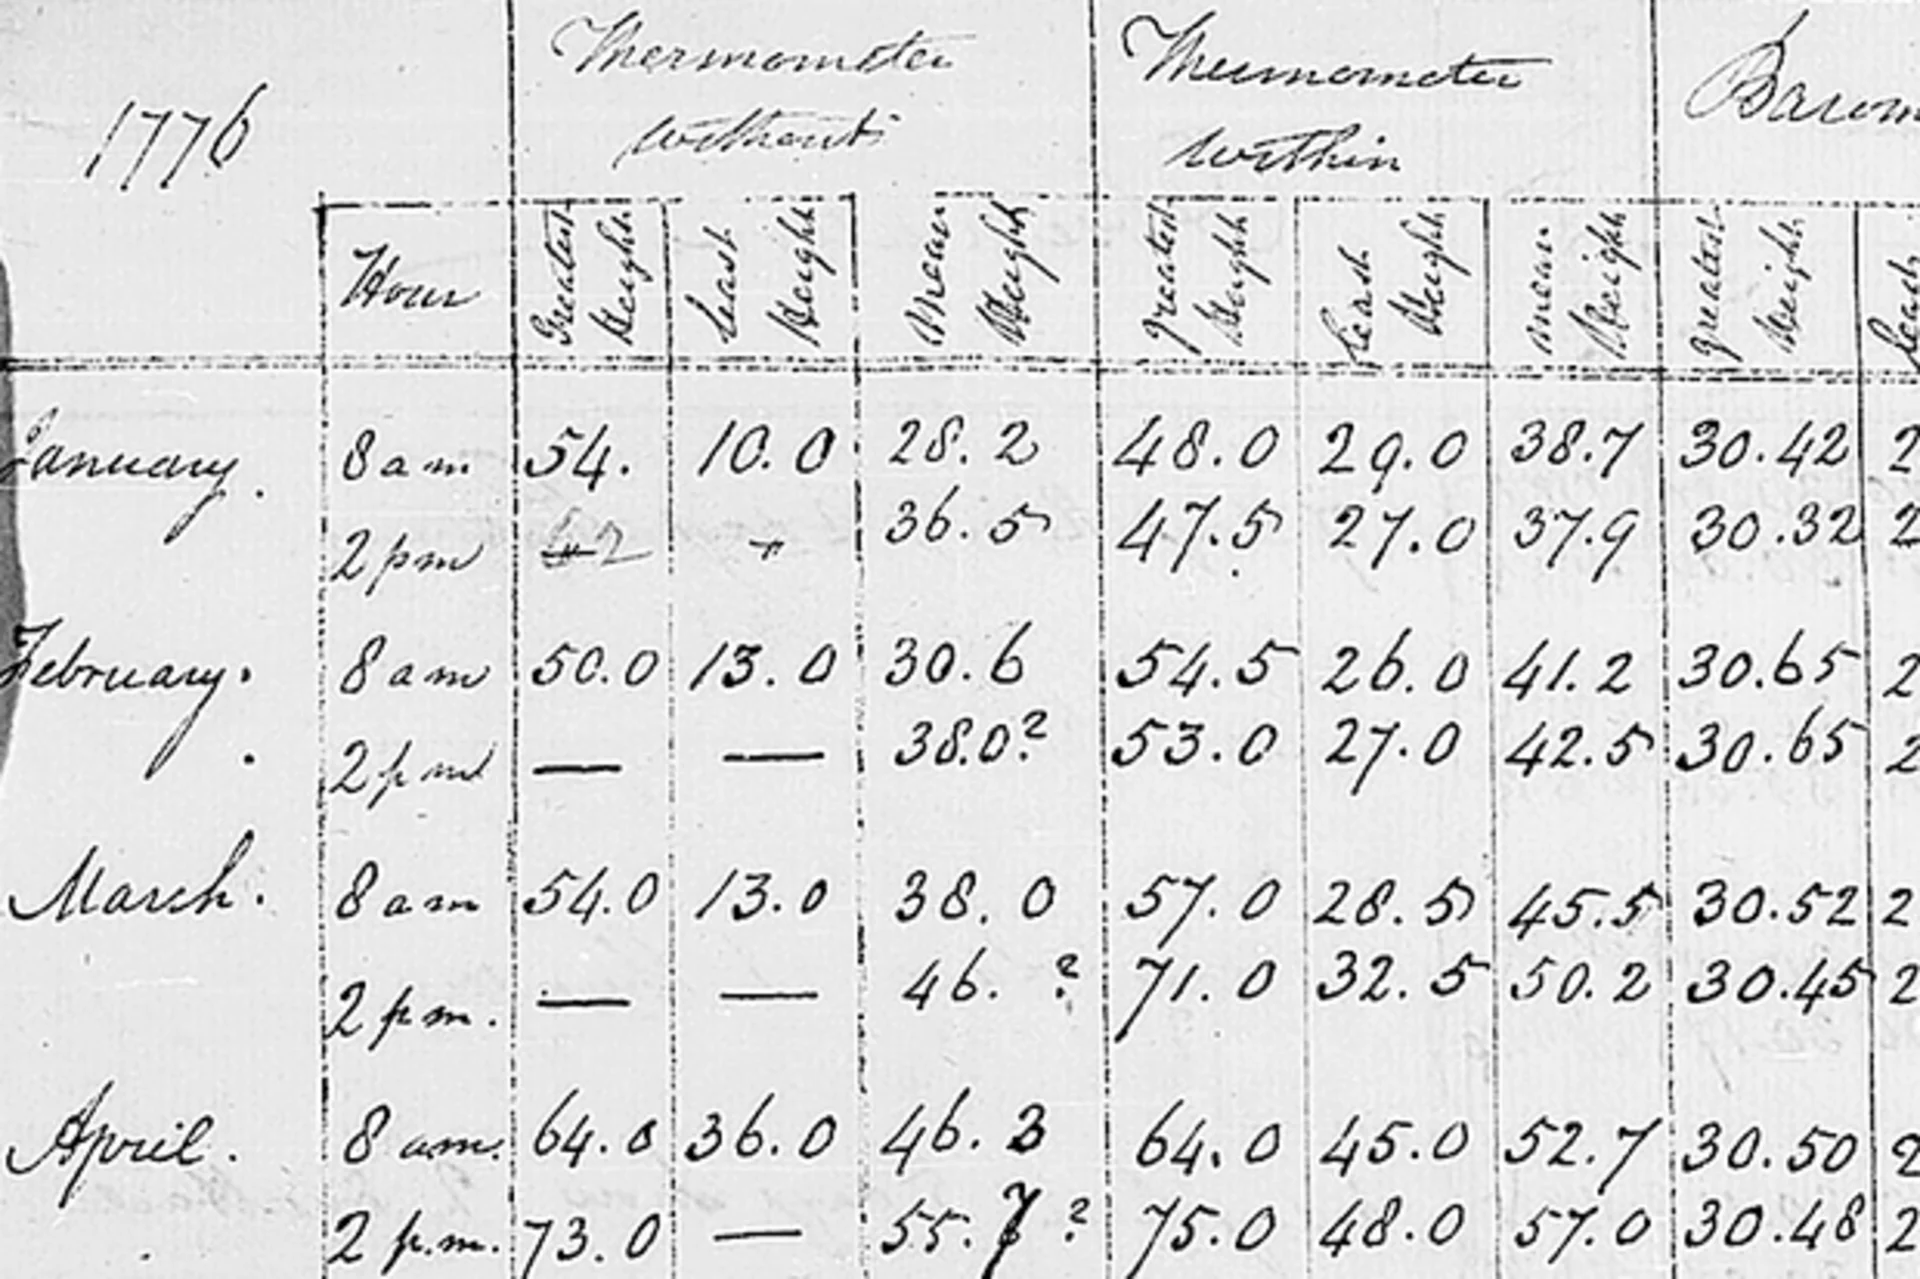 Thomas Jefferson logged the weather twice daily up until a week before he died